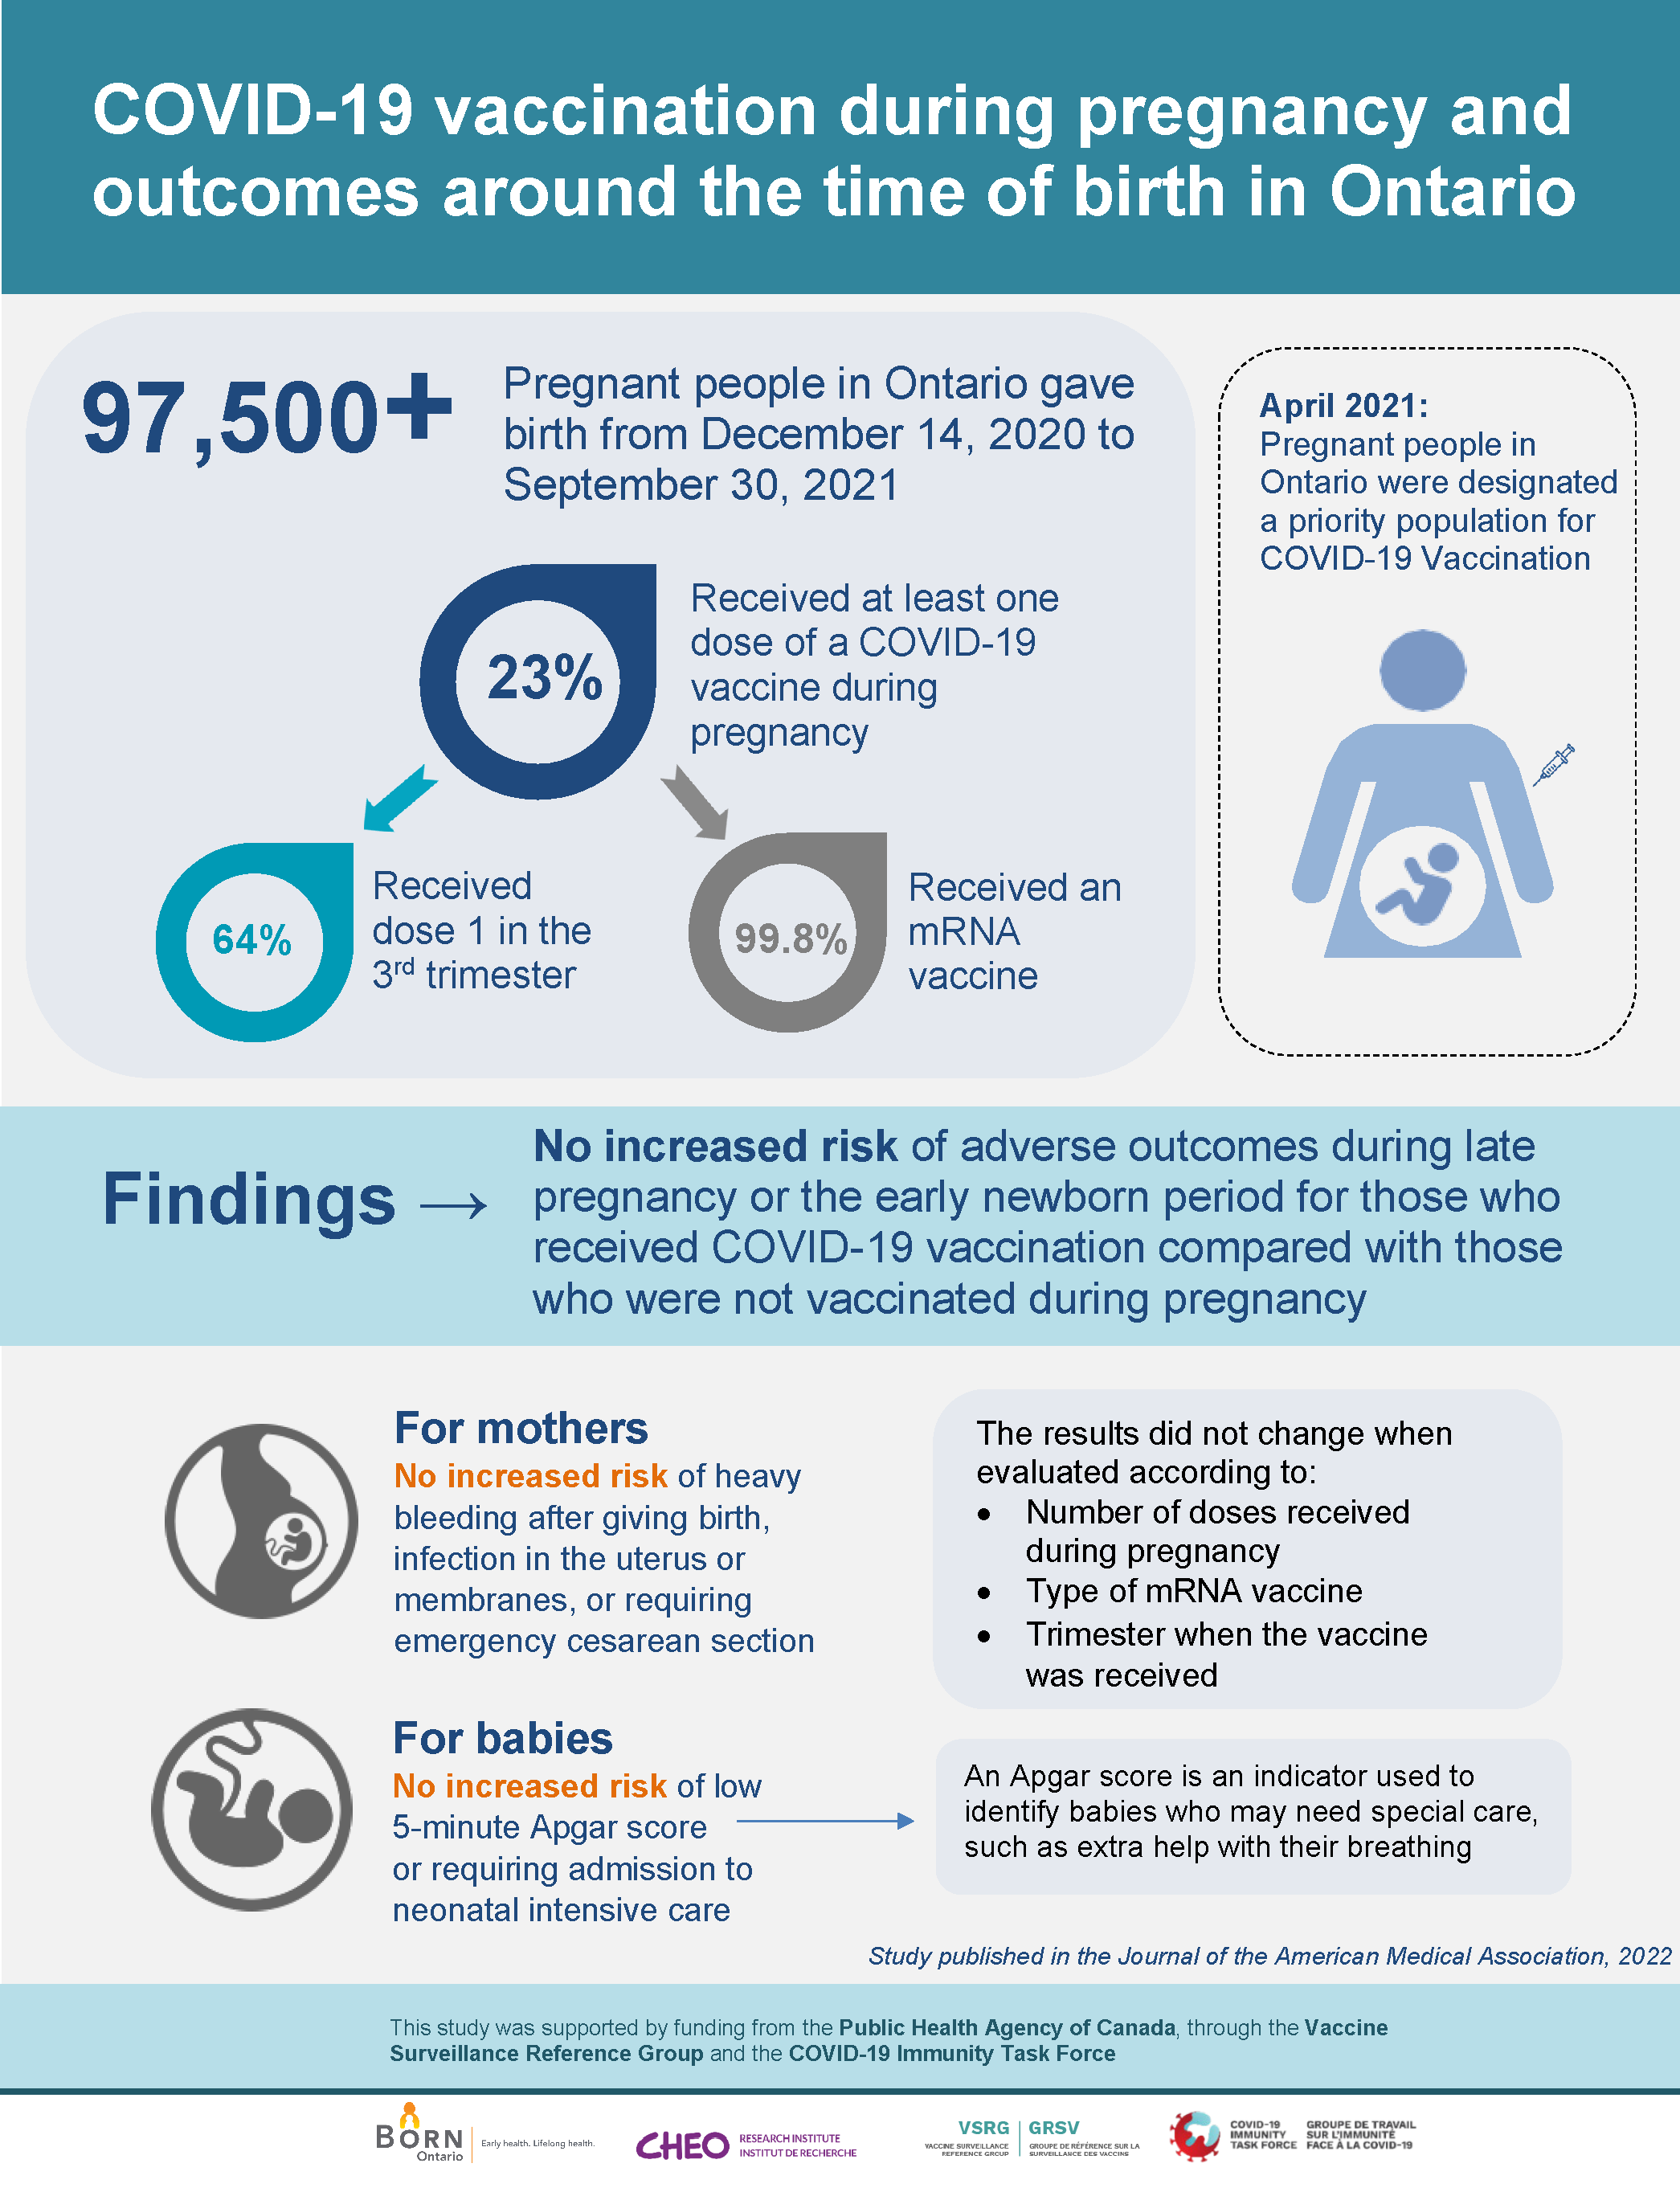 COVID-19 vaccination during pregnancy and outcomes around the time of birth in Ontario